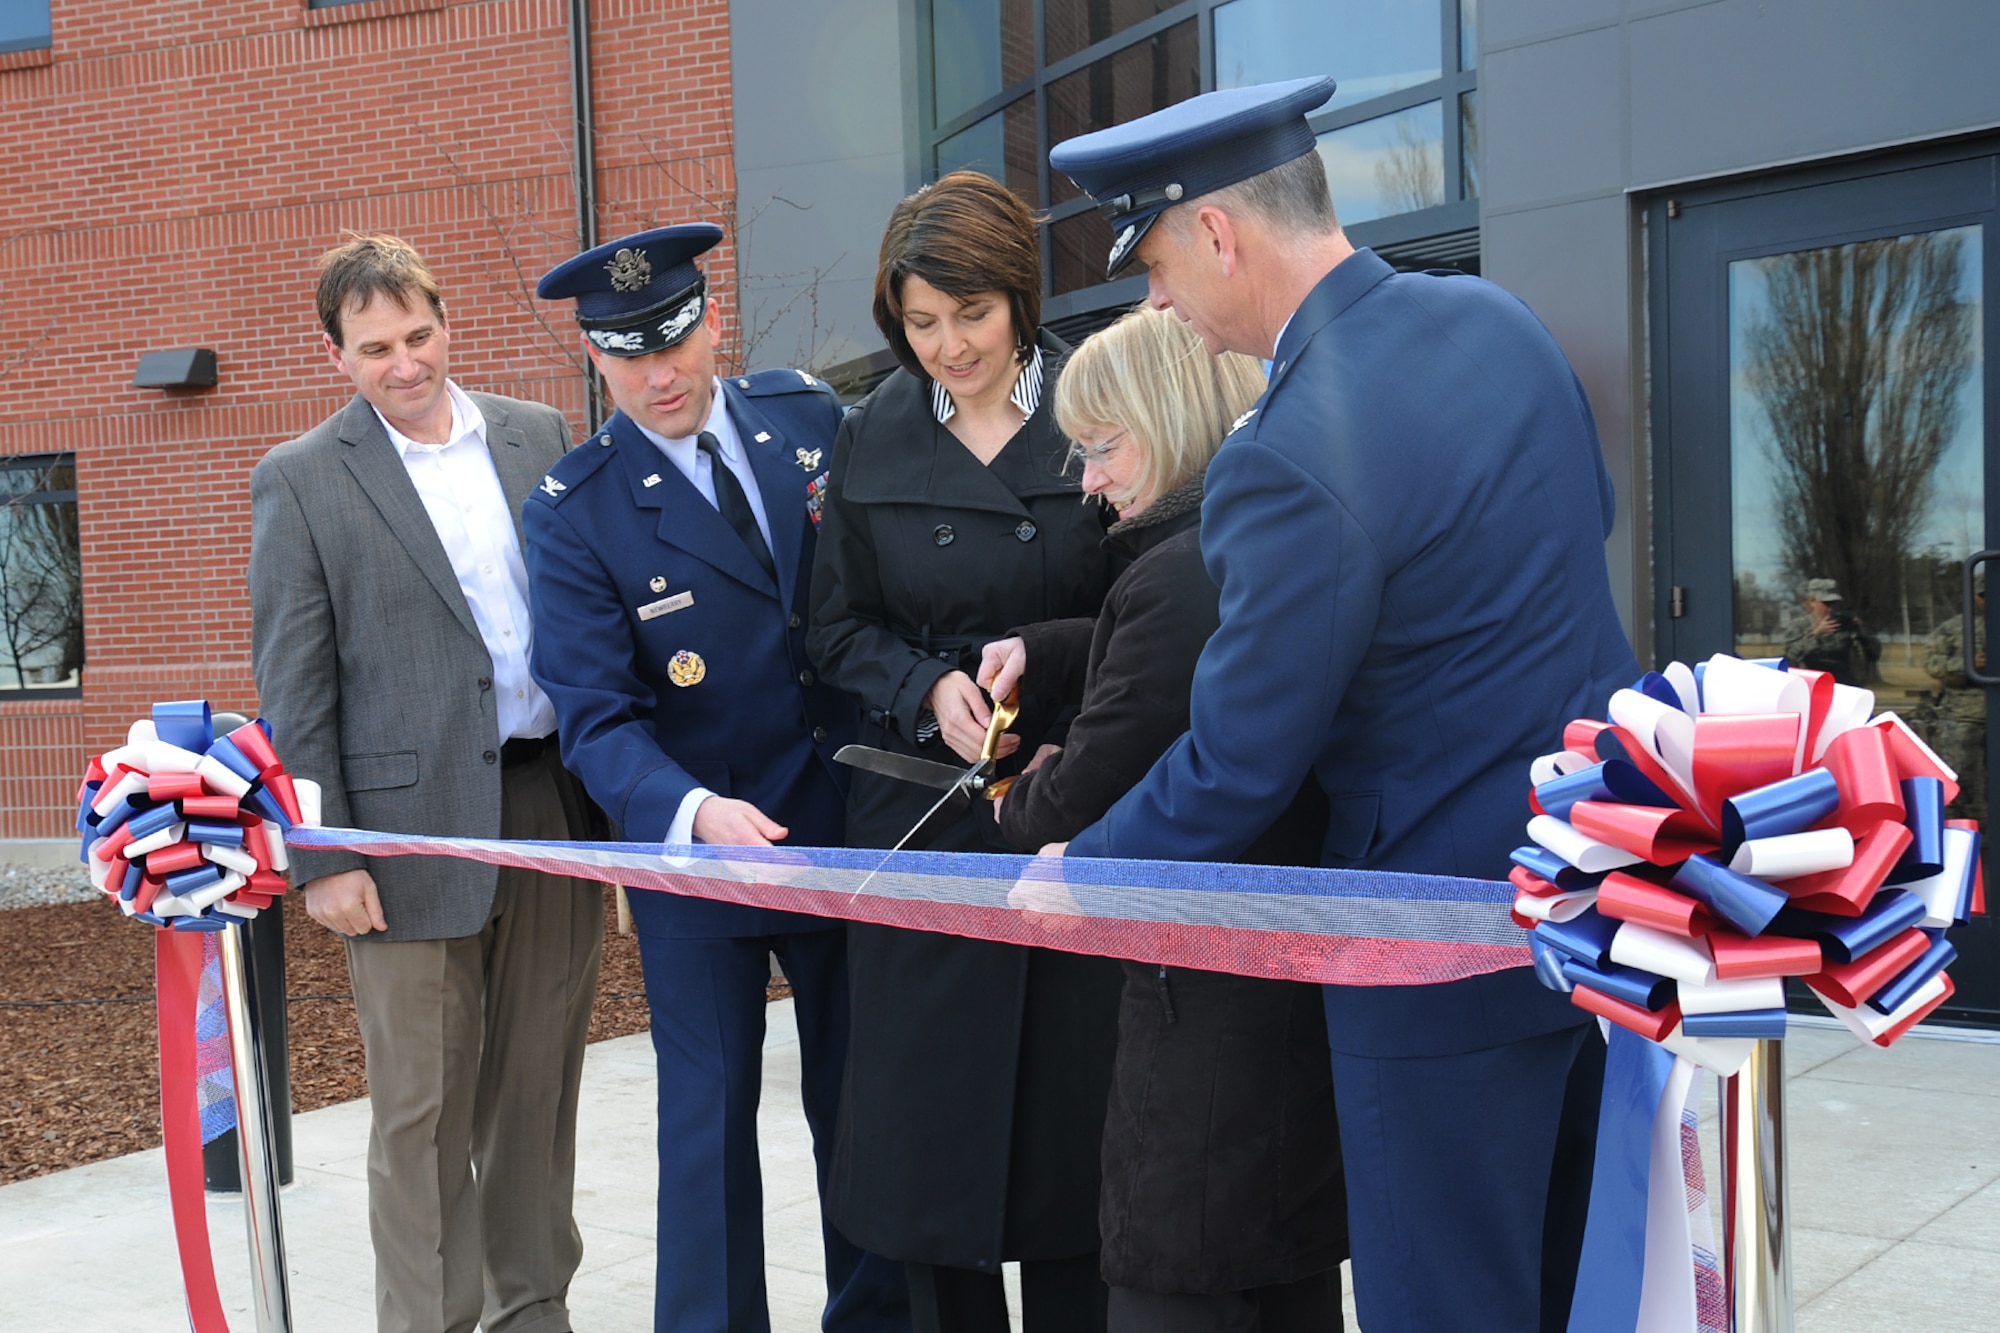 Doug Jackson, Jackson Construction Group president, Col. Brian Newberry, the 92nd Air Refueling Wing commander, U.S. Rep. Cathy McMorris Rodgers, U.S. Sen. Patty Murray and Col. Daniel Swain, the 141st ARW commander, cut the ribbon during the opening of the new headquarters building at Fairchild Air Force Base, Wash., March 20, 2014. The building is designed for both the 92nd and 141st Air Refueling Wings. (U.S. Air Force photo by Airman 1st Class Janelle Patiño/Released)